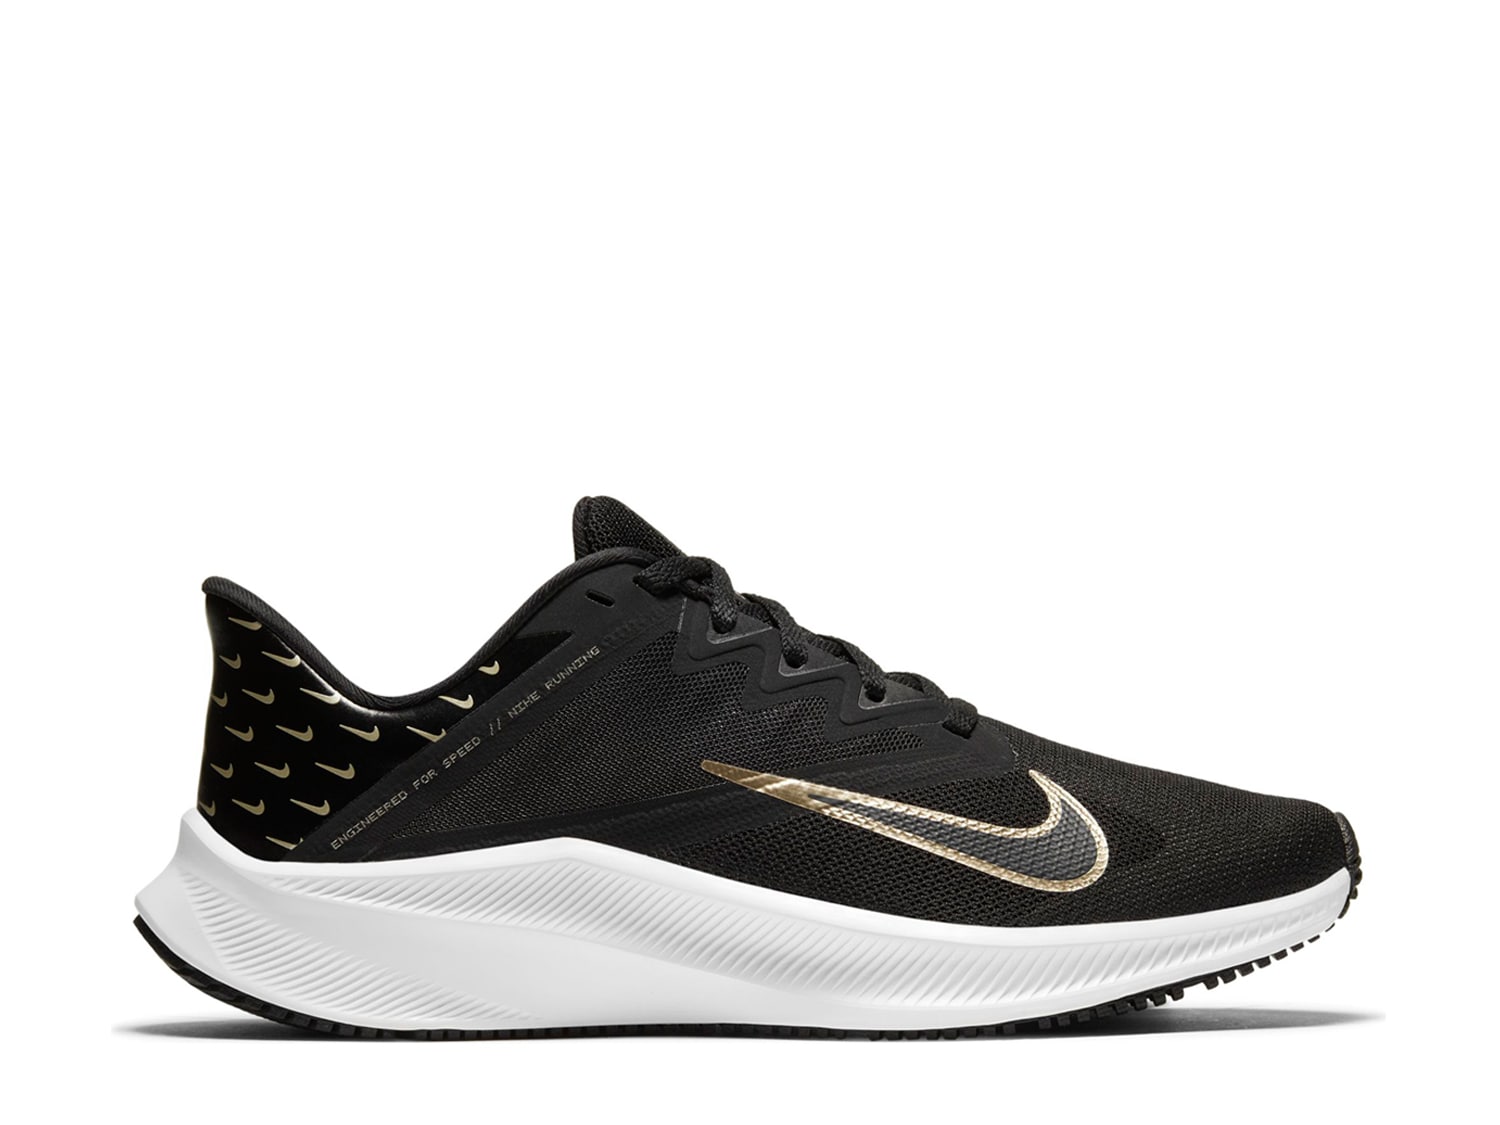 black and gold athletic shoes